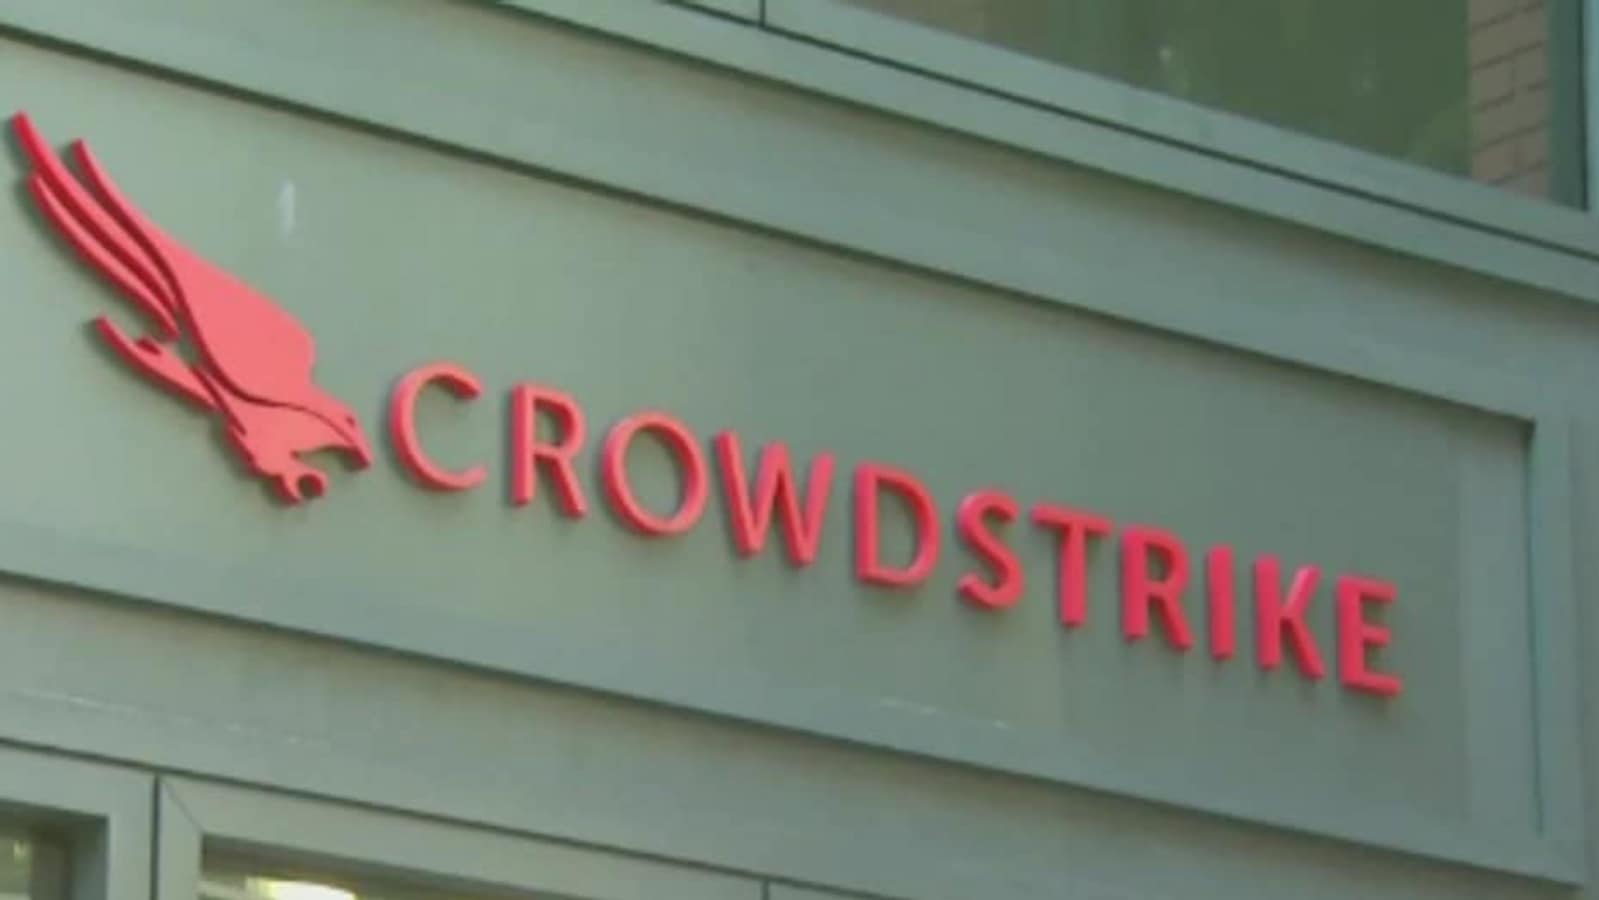 Windows outage: CrowdStrike blames bug in testing software; CEO says 'deeply sorry'